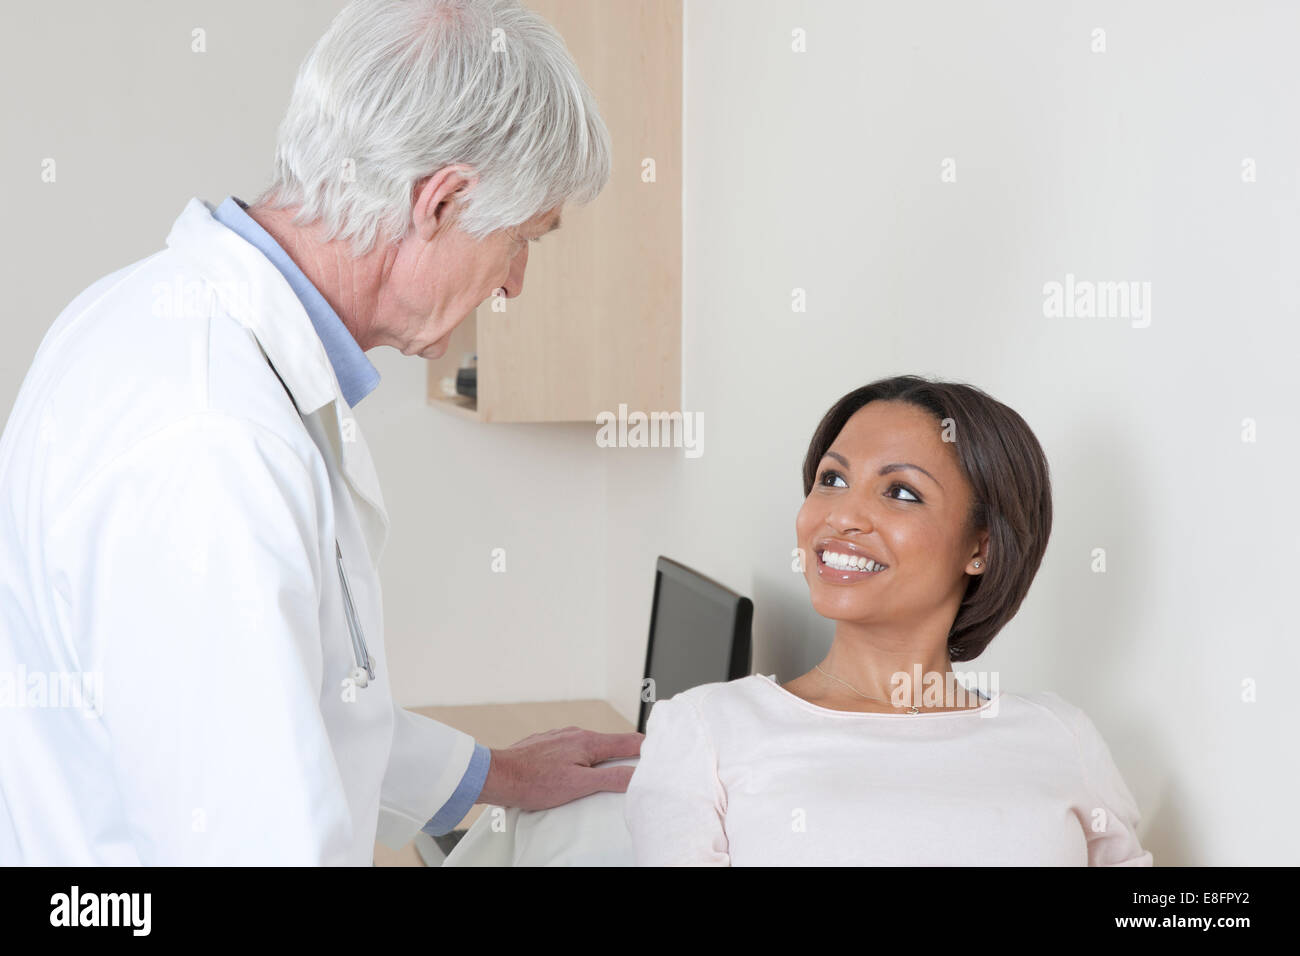 Doctor talking to female patient in examination room Stock Photo